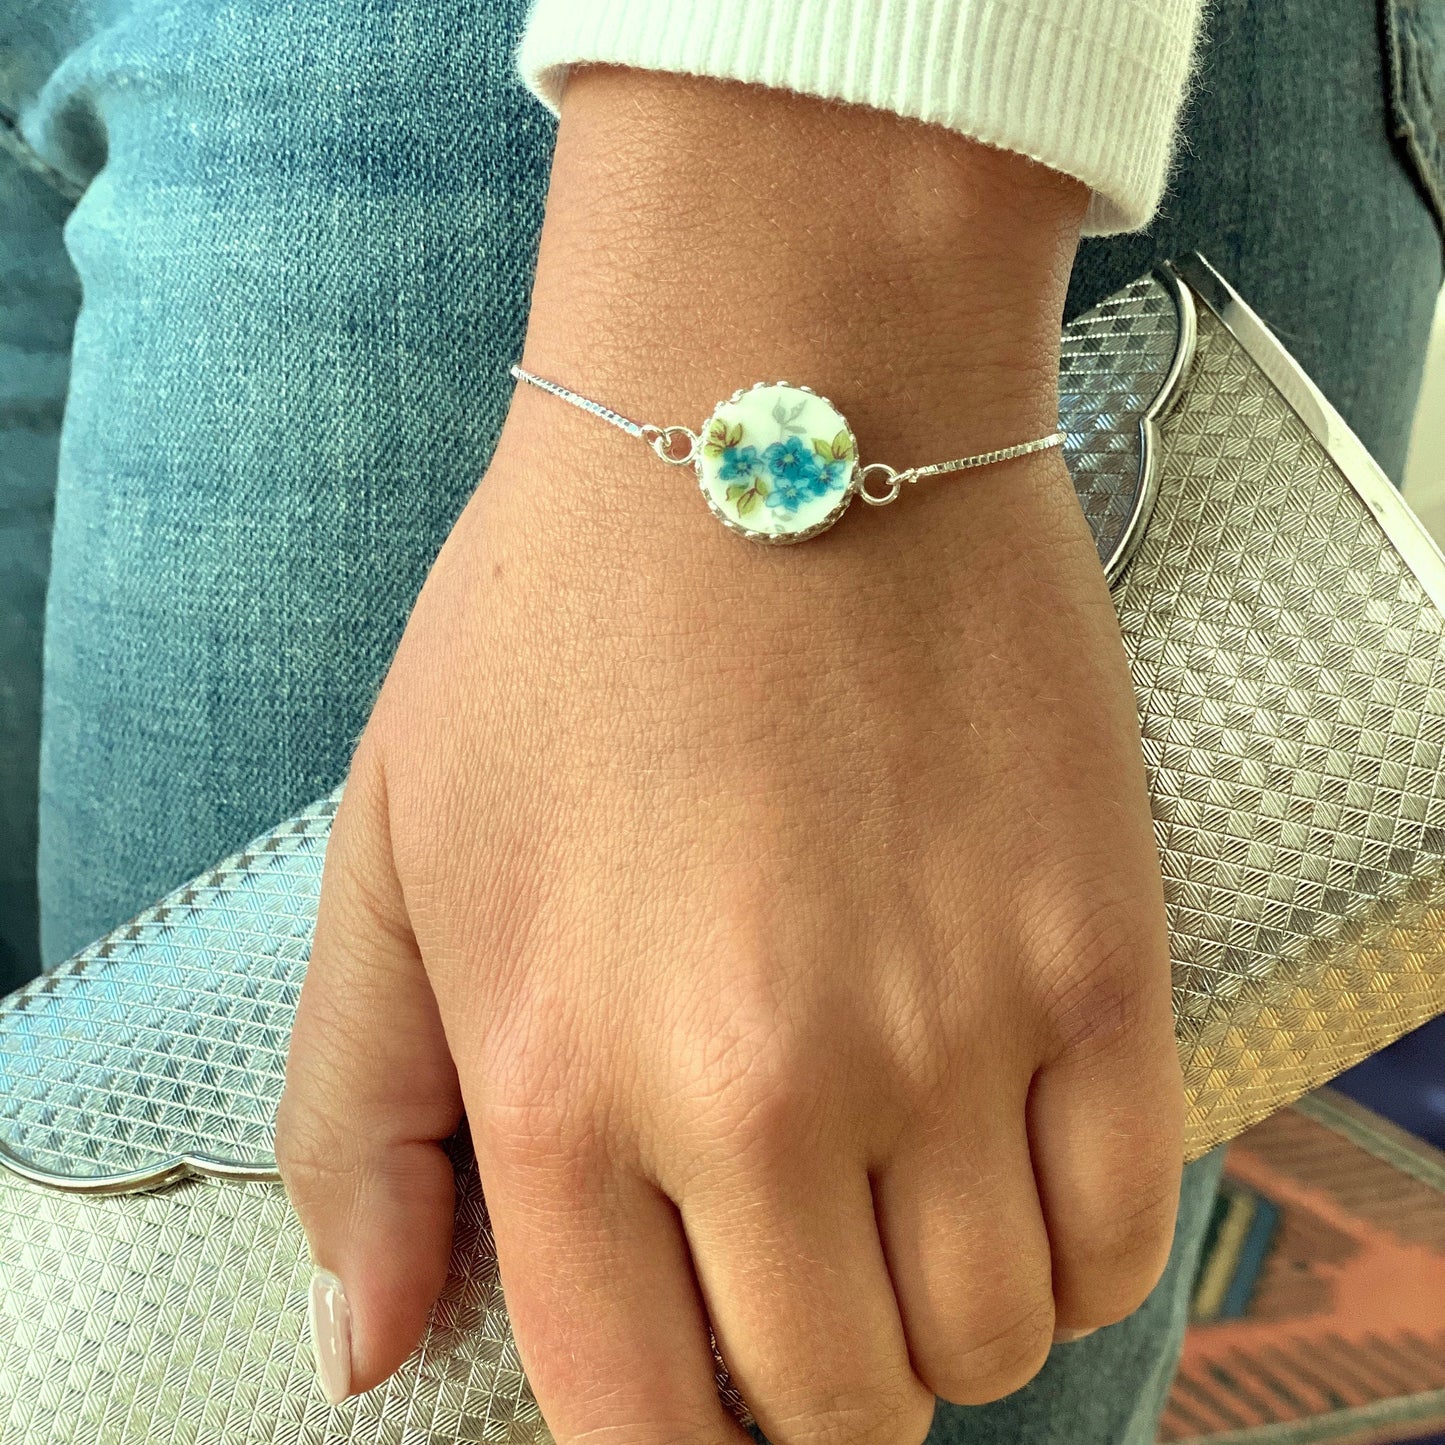 Forget Me Not Dainty Adjustable Bracelet, Broken China Jewelry, Sterling Silver, Unique Anniversary Gift for Women